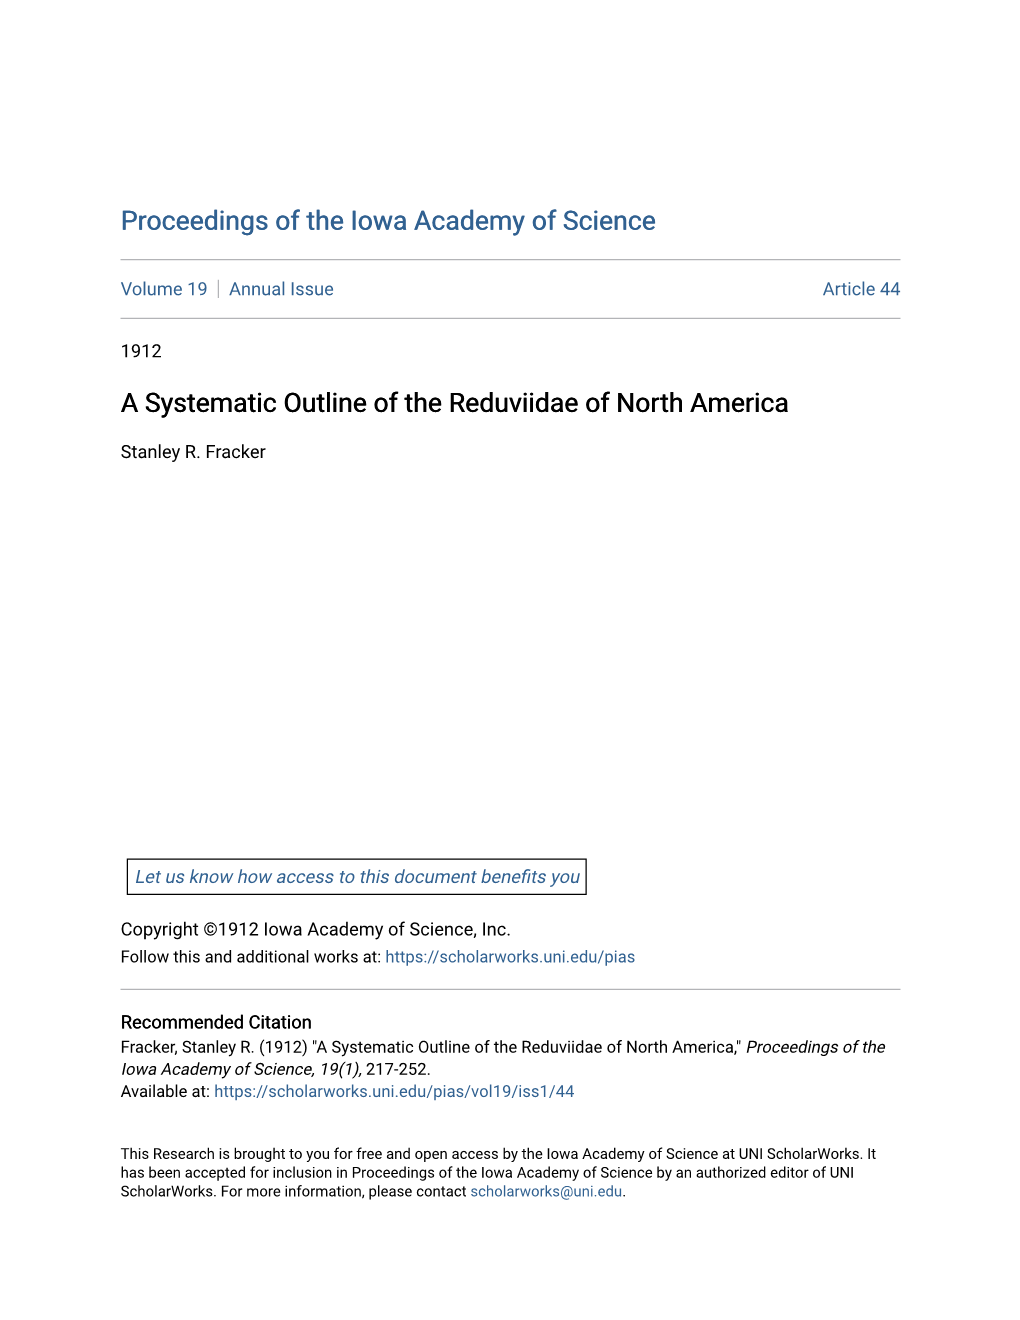 A Systematic Outline of the Reduviidae of North America